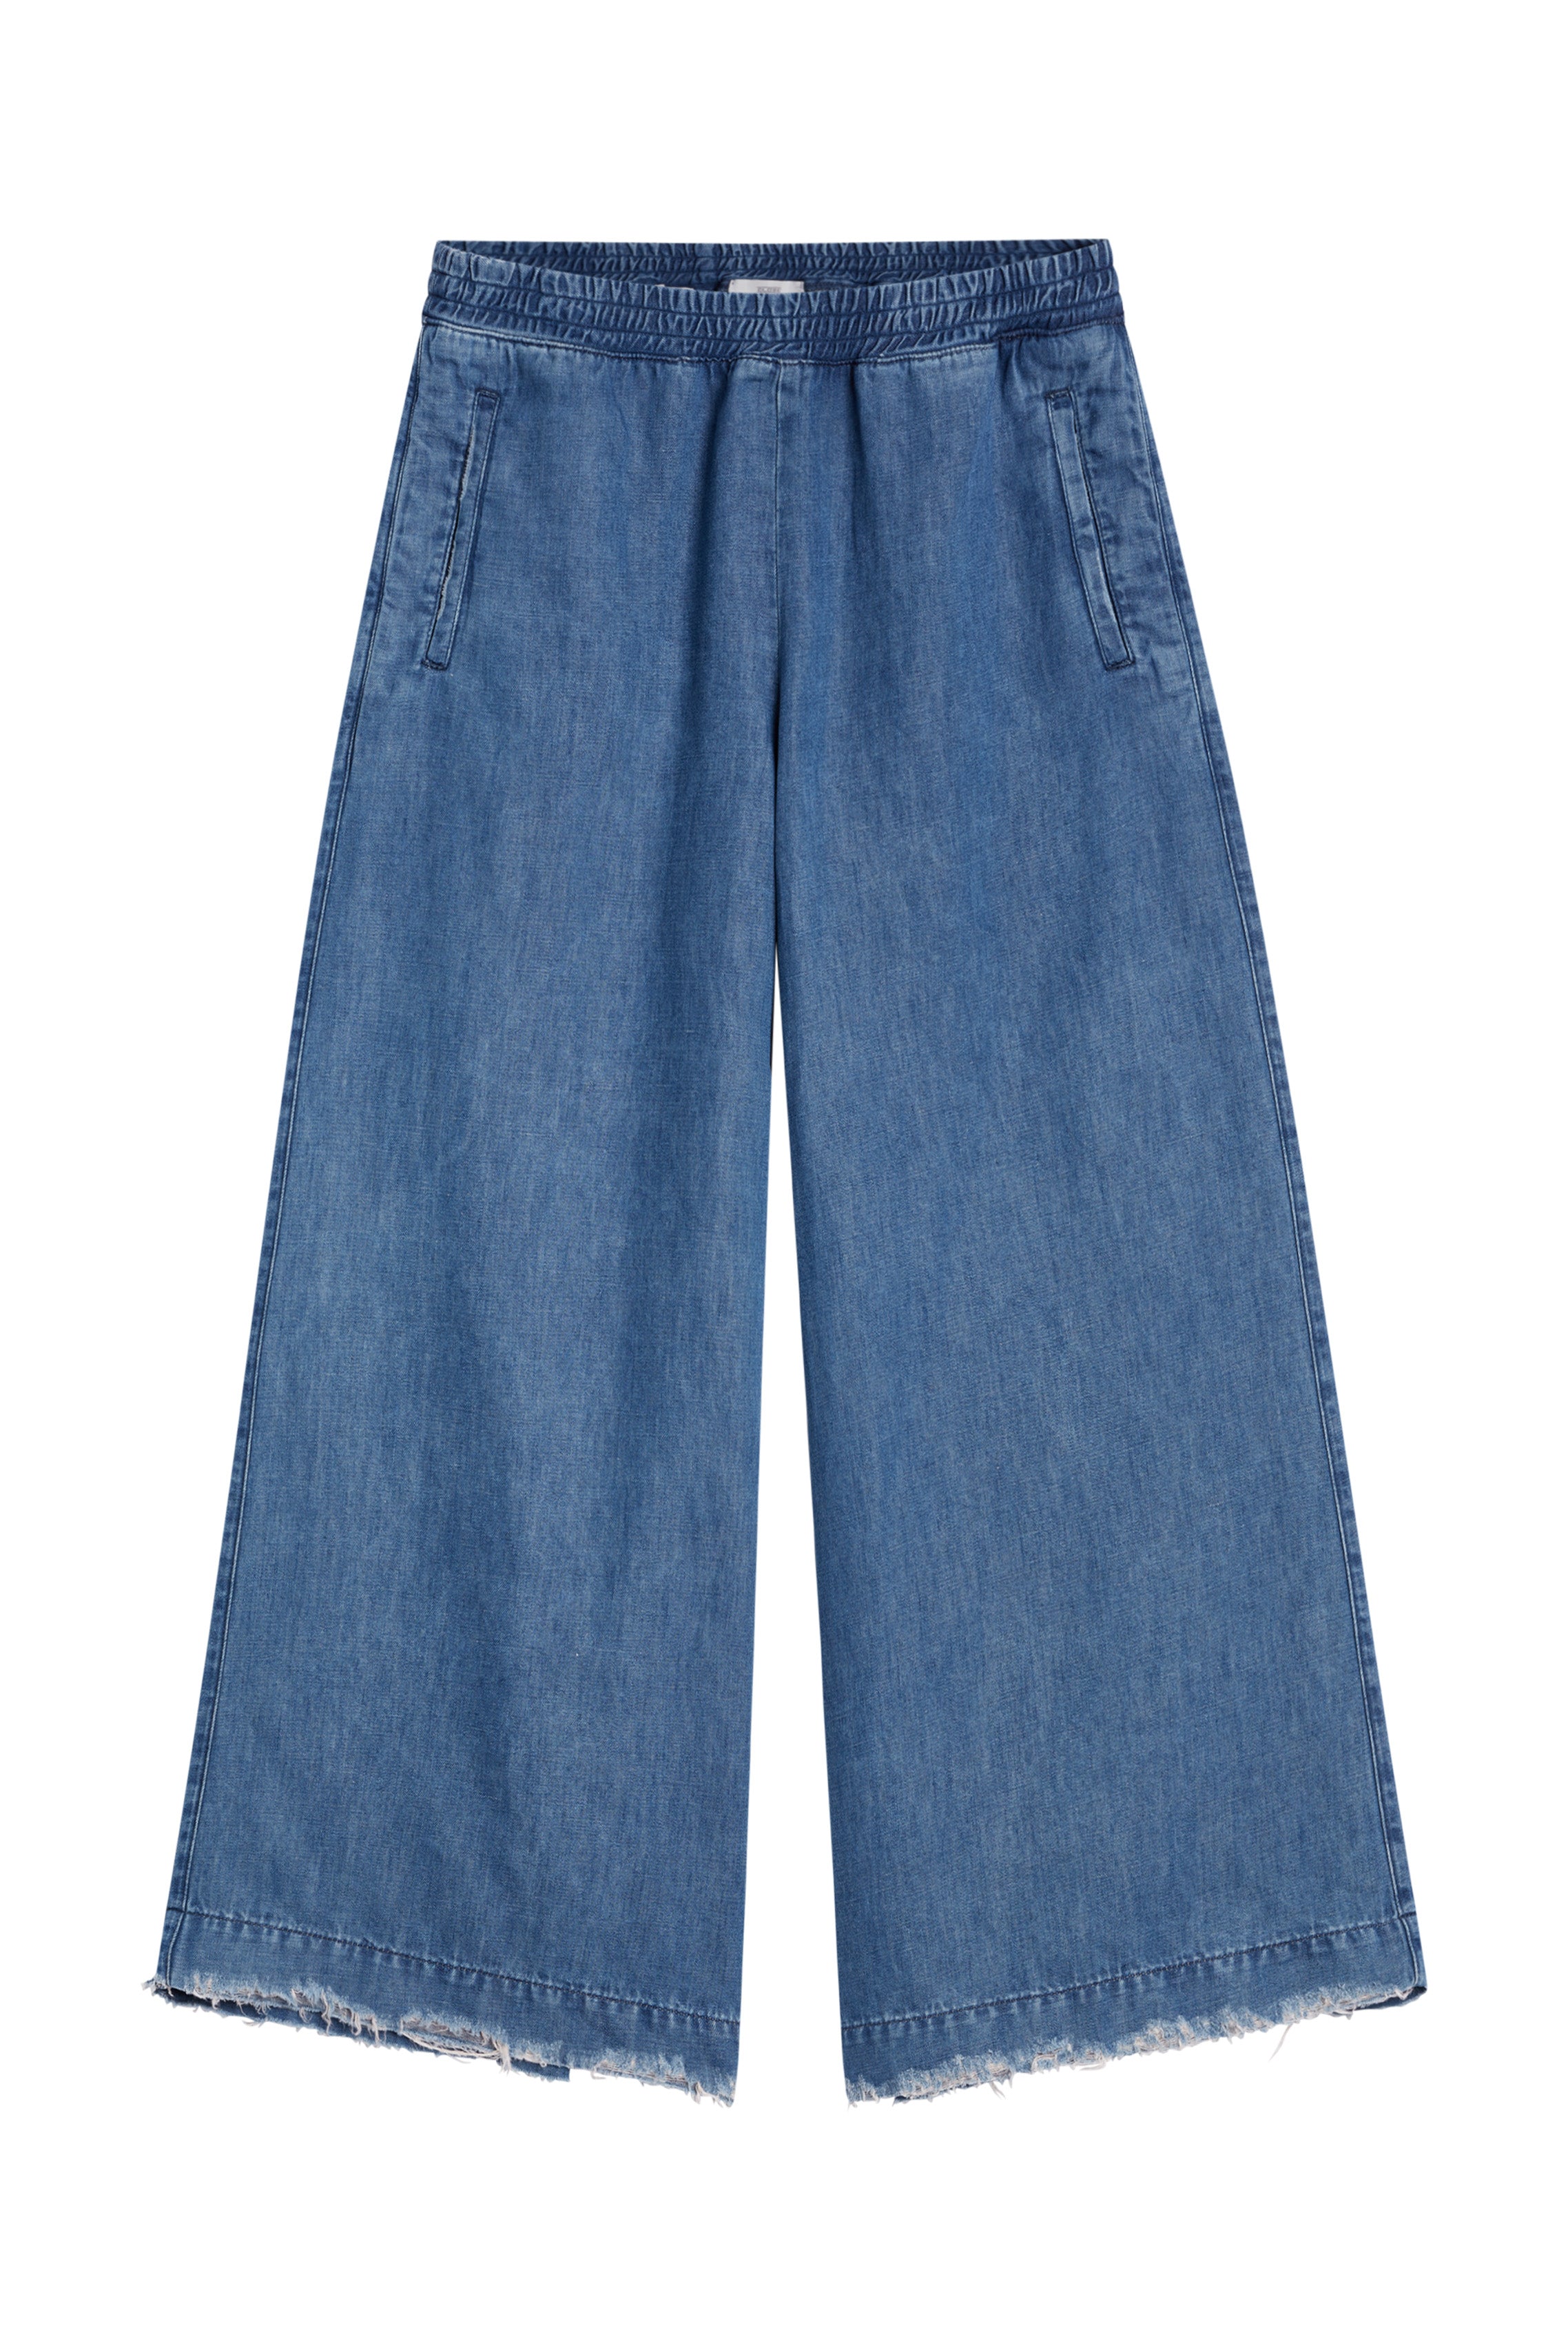 Experience the blend of comfort and style with Wren from Closed. This lightweight Italian denim and linen blend has a wide fit, elastic waistband and convenient side pockets. 